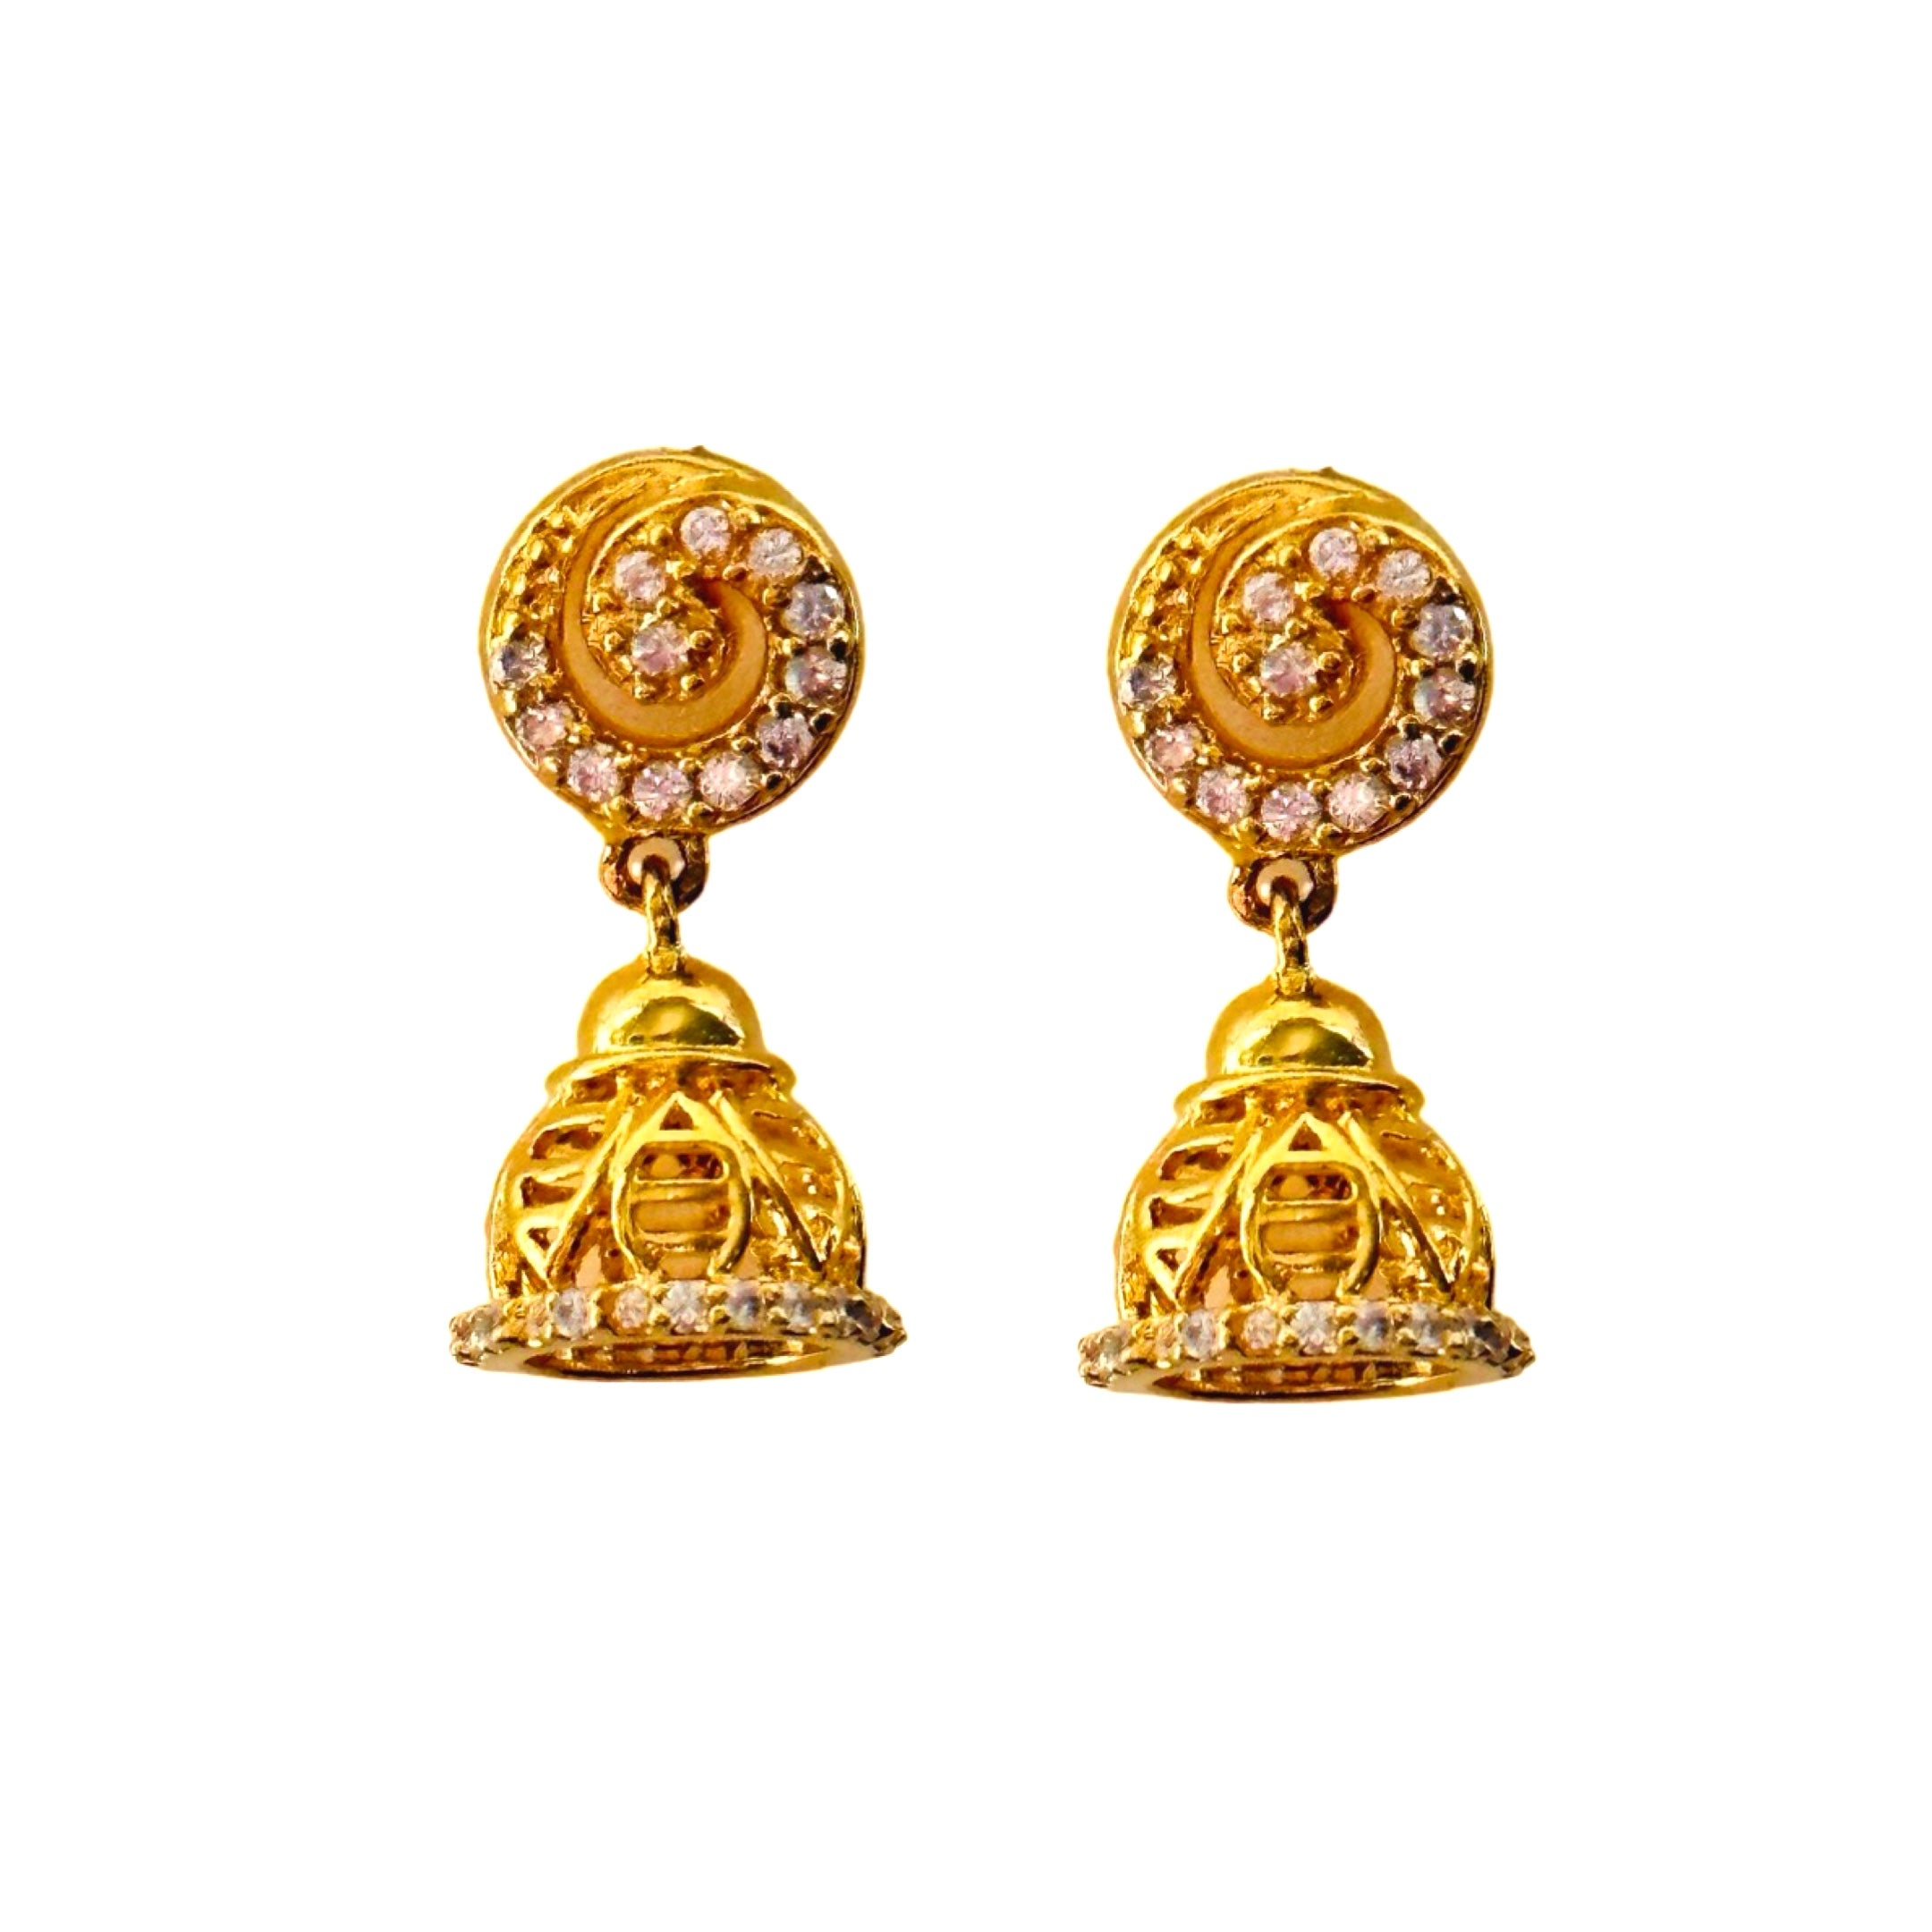 Traditional Oxidized Silver Jhumka Earrings for Women - Cultural Elegance  with Vintage Appeal